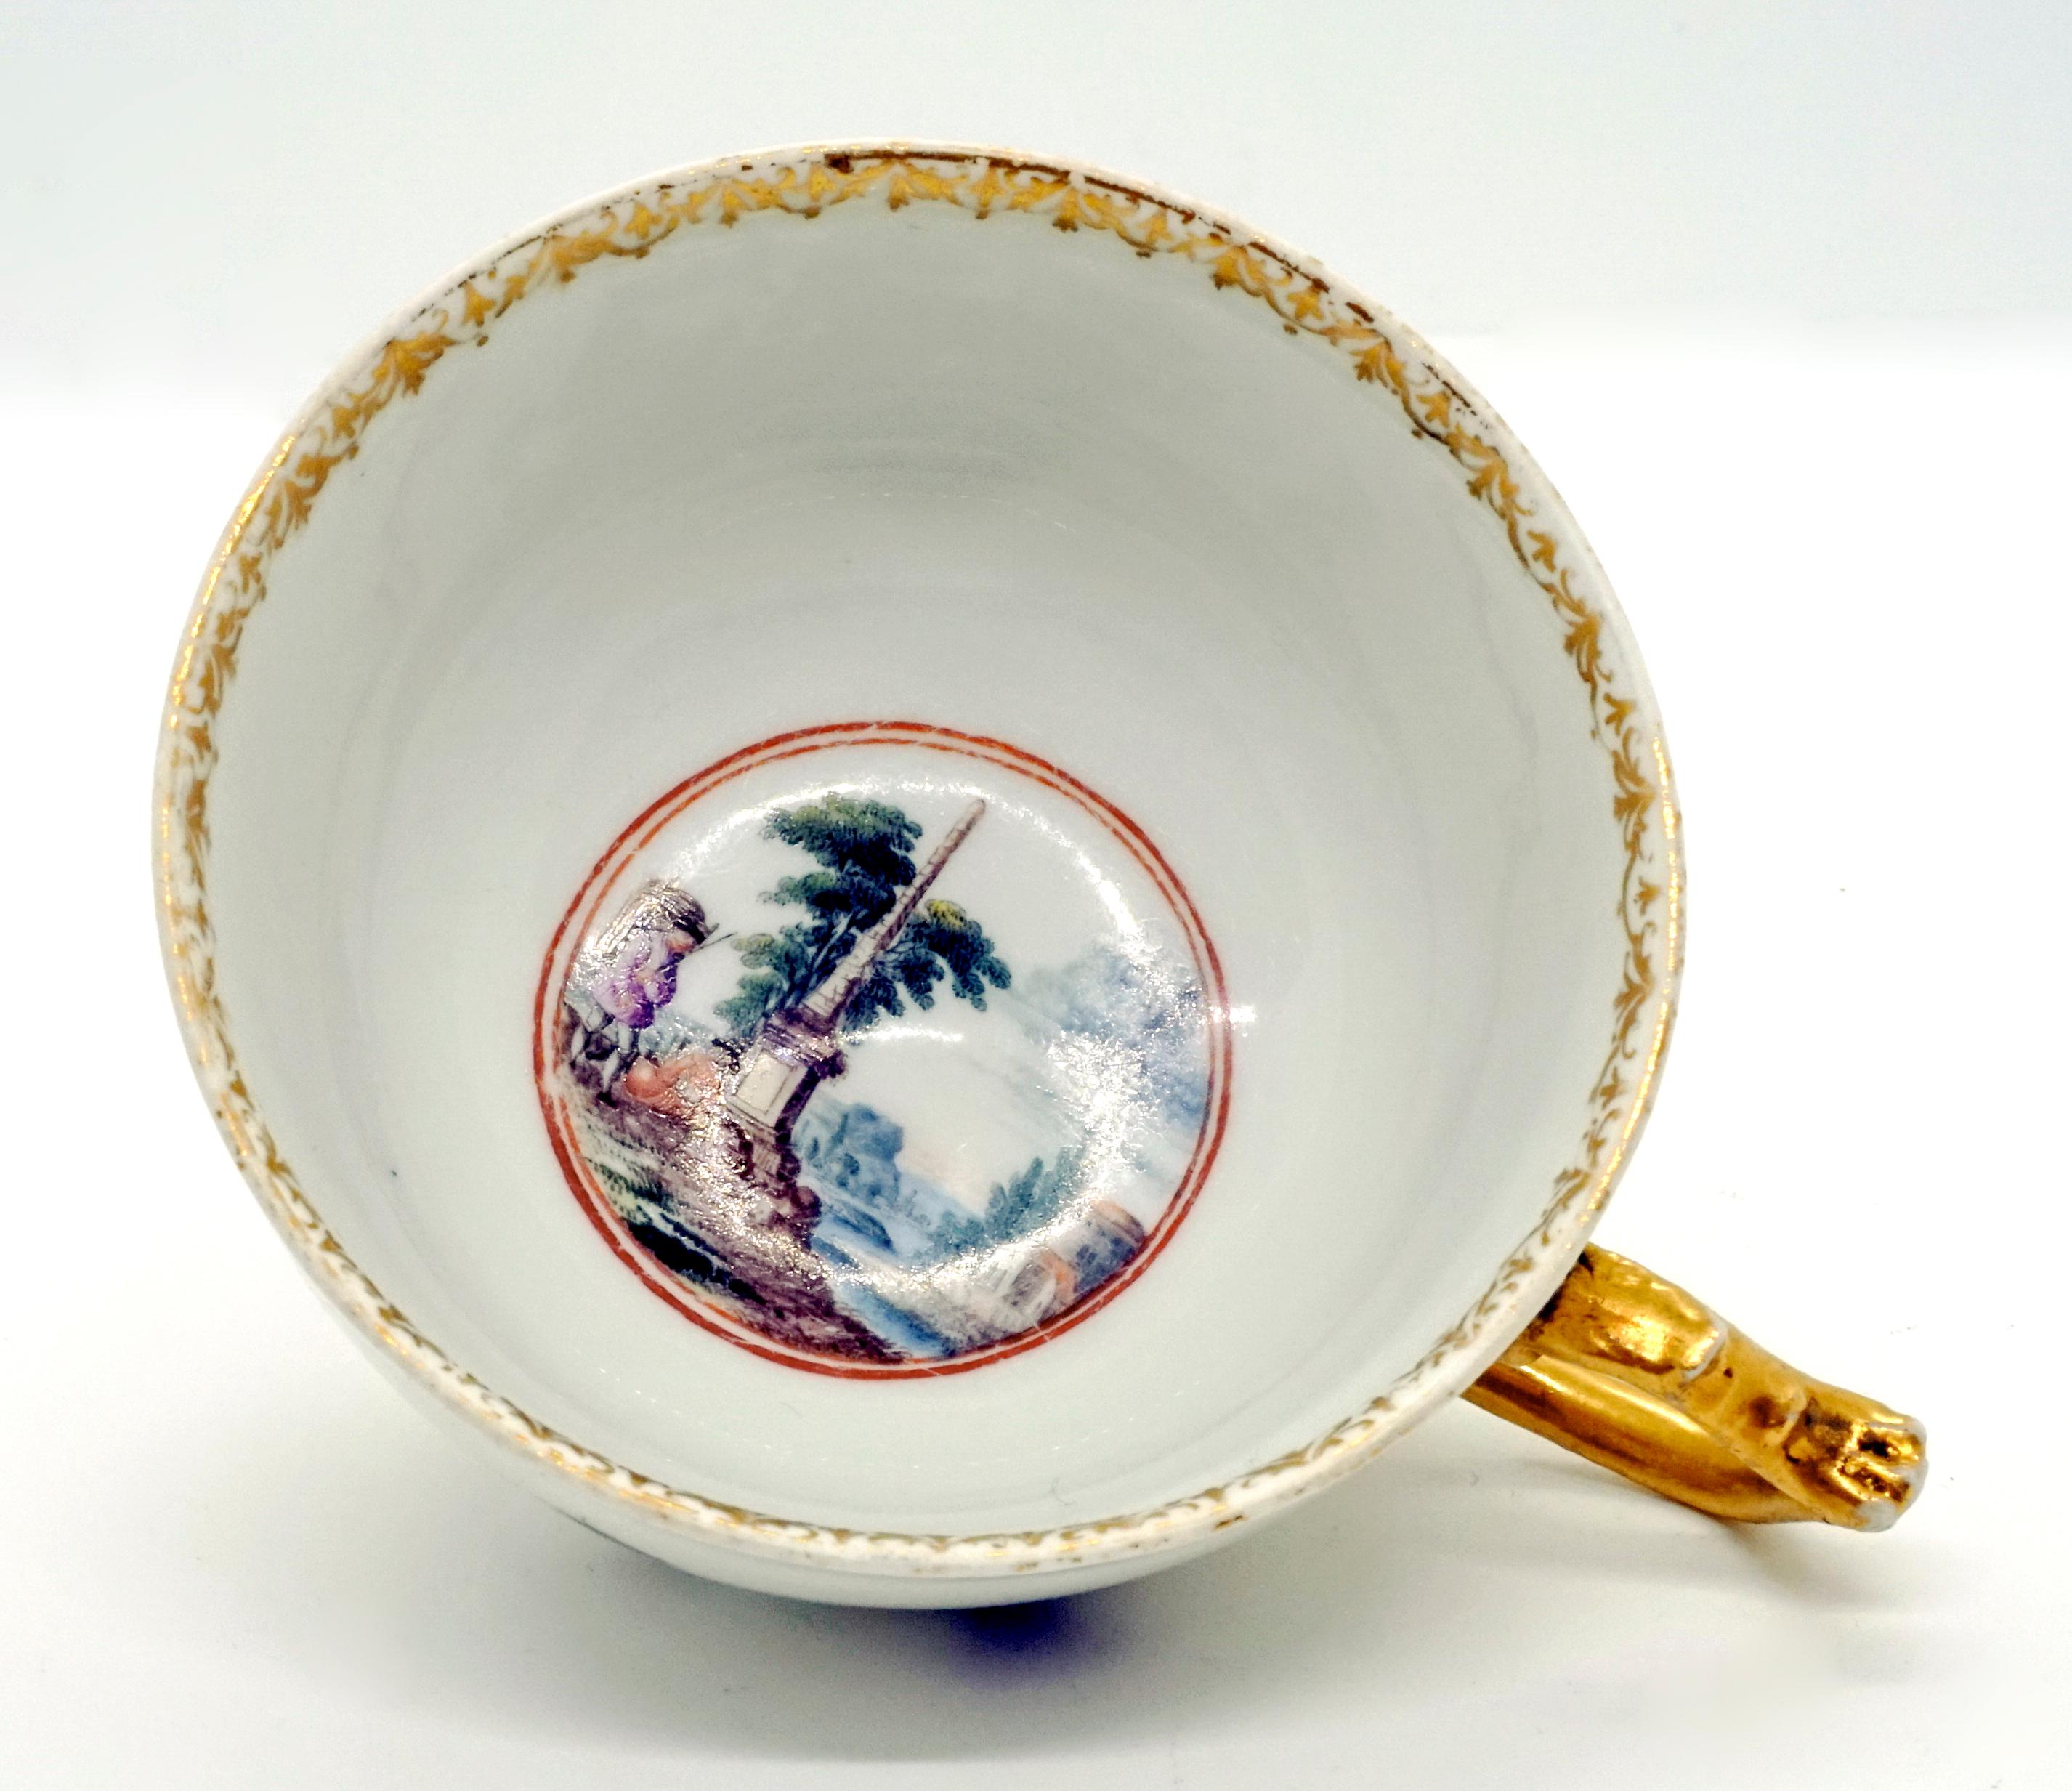 Hand-Crafted Eary 19th Century Meissen Cup and Saucer with Kauffahrtei Scenes and Gold Decor